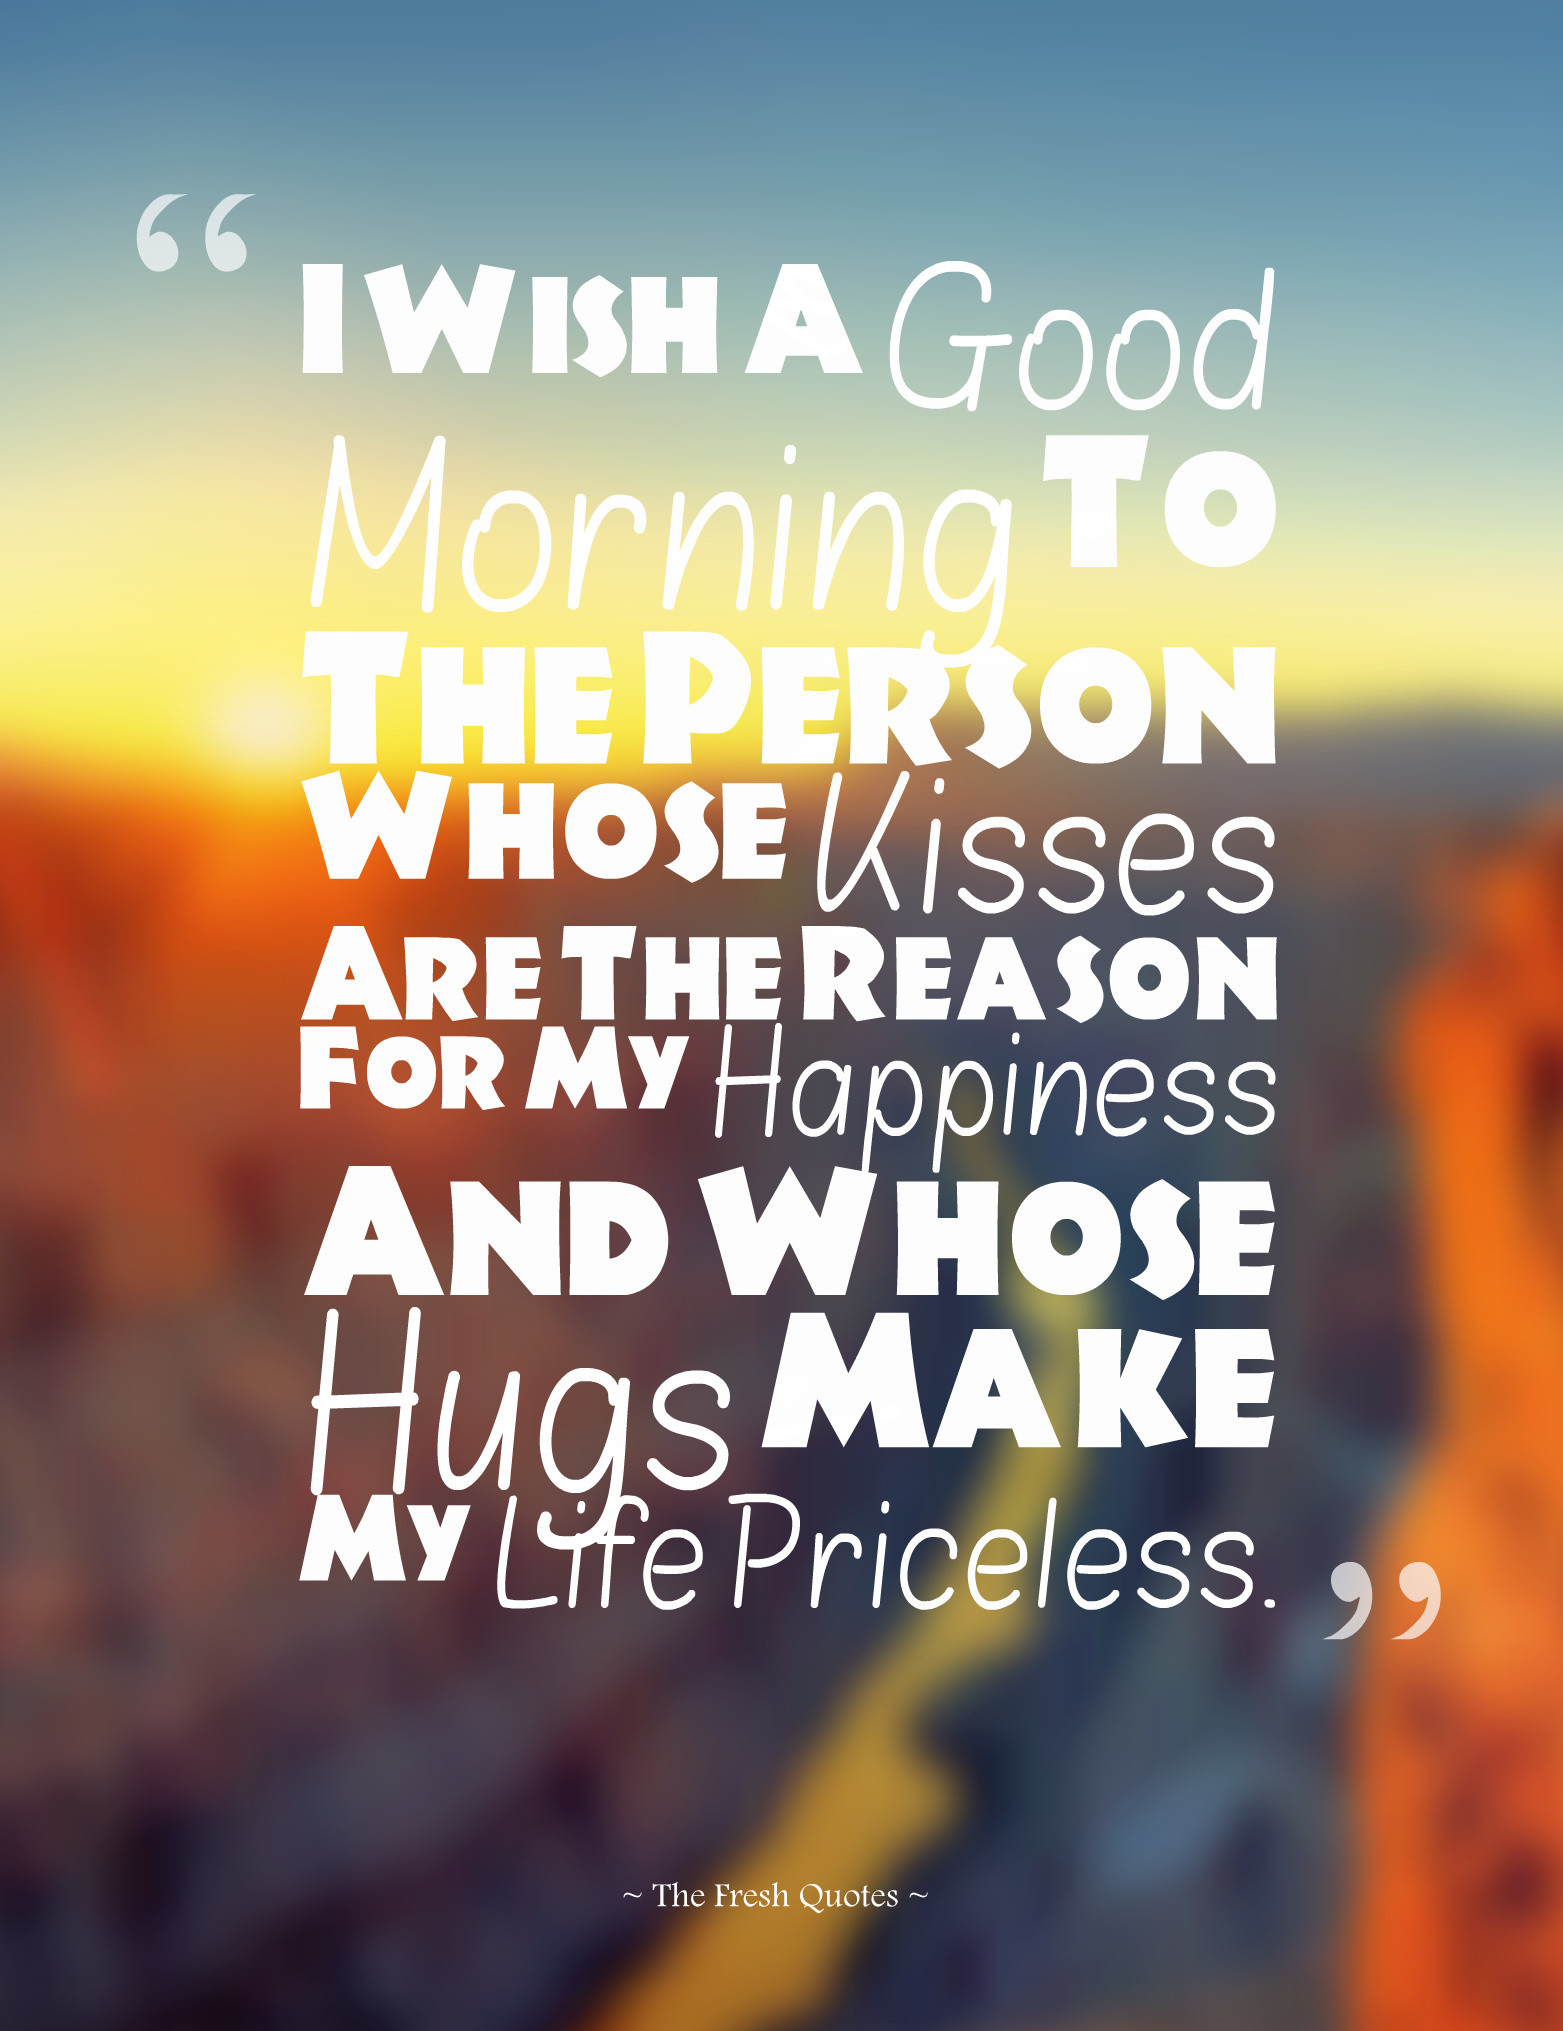 Good Morning Romantic Quotes
 22 Best Collection of Romantic Good Morning Wishes